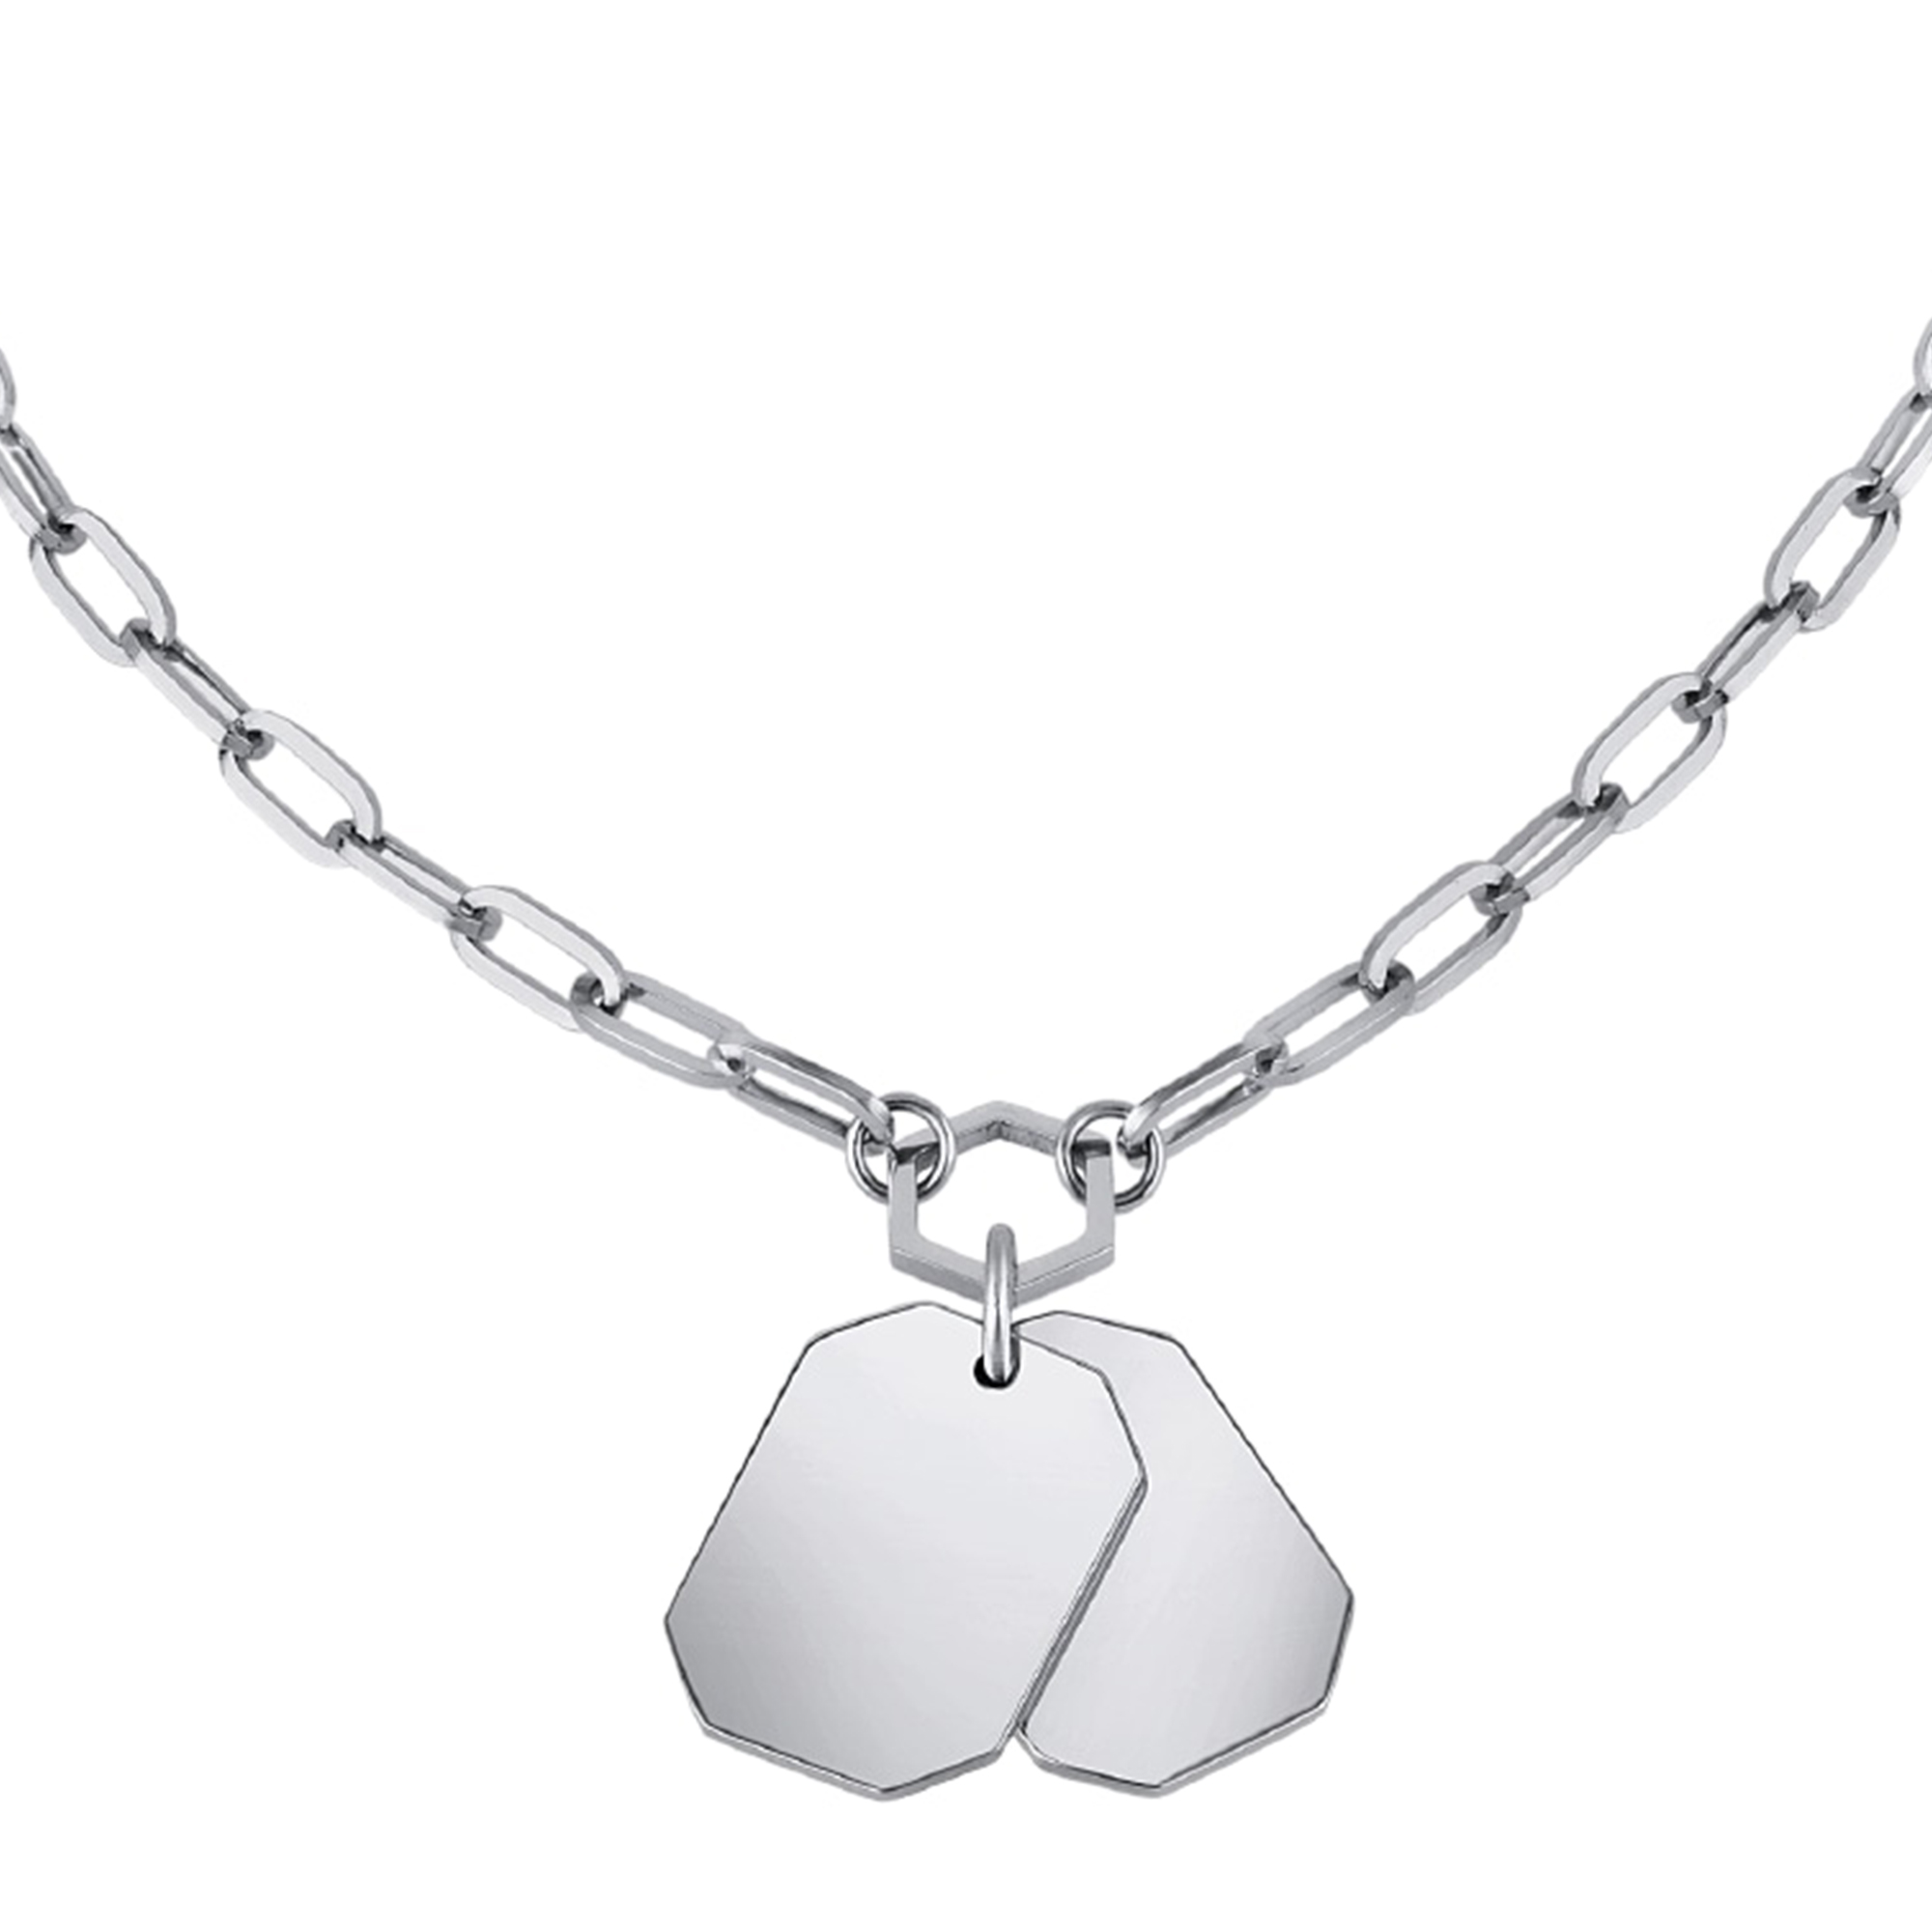 PRIVATE CODE - STAINLESS STEEL NECKLACE - 6 - TJ3121 | Breil